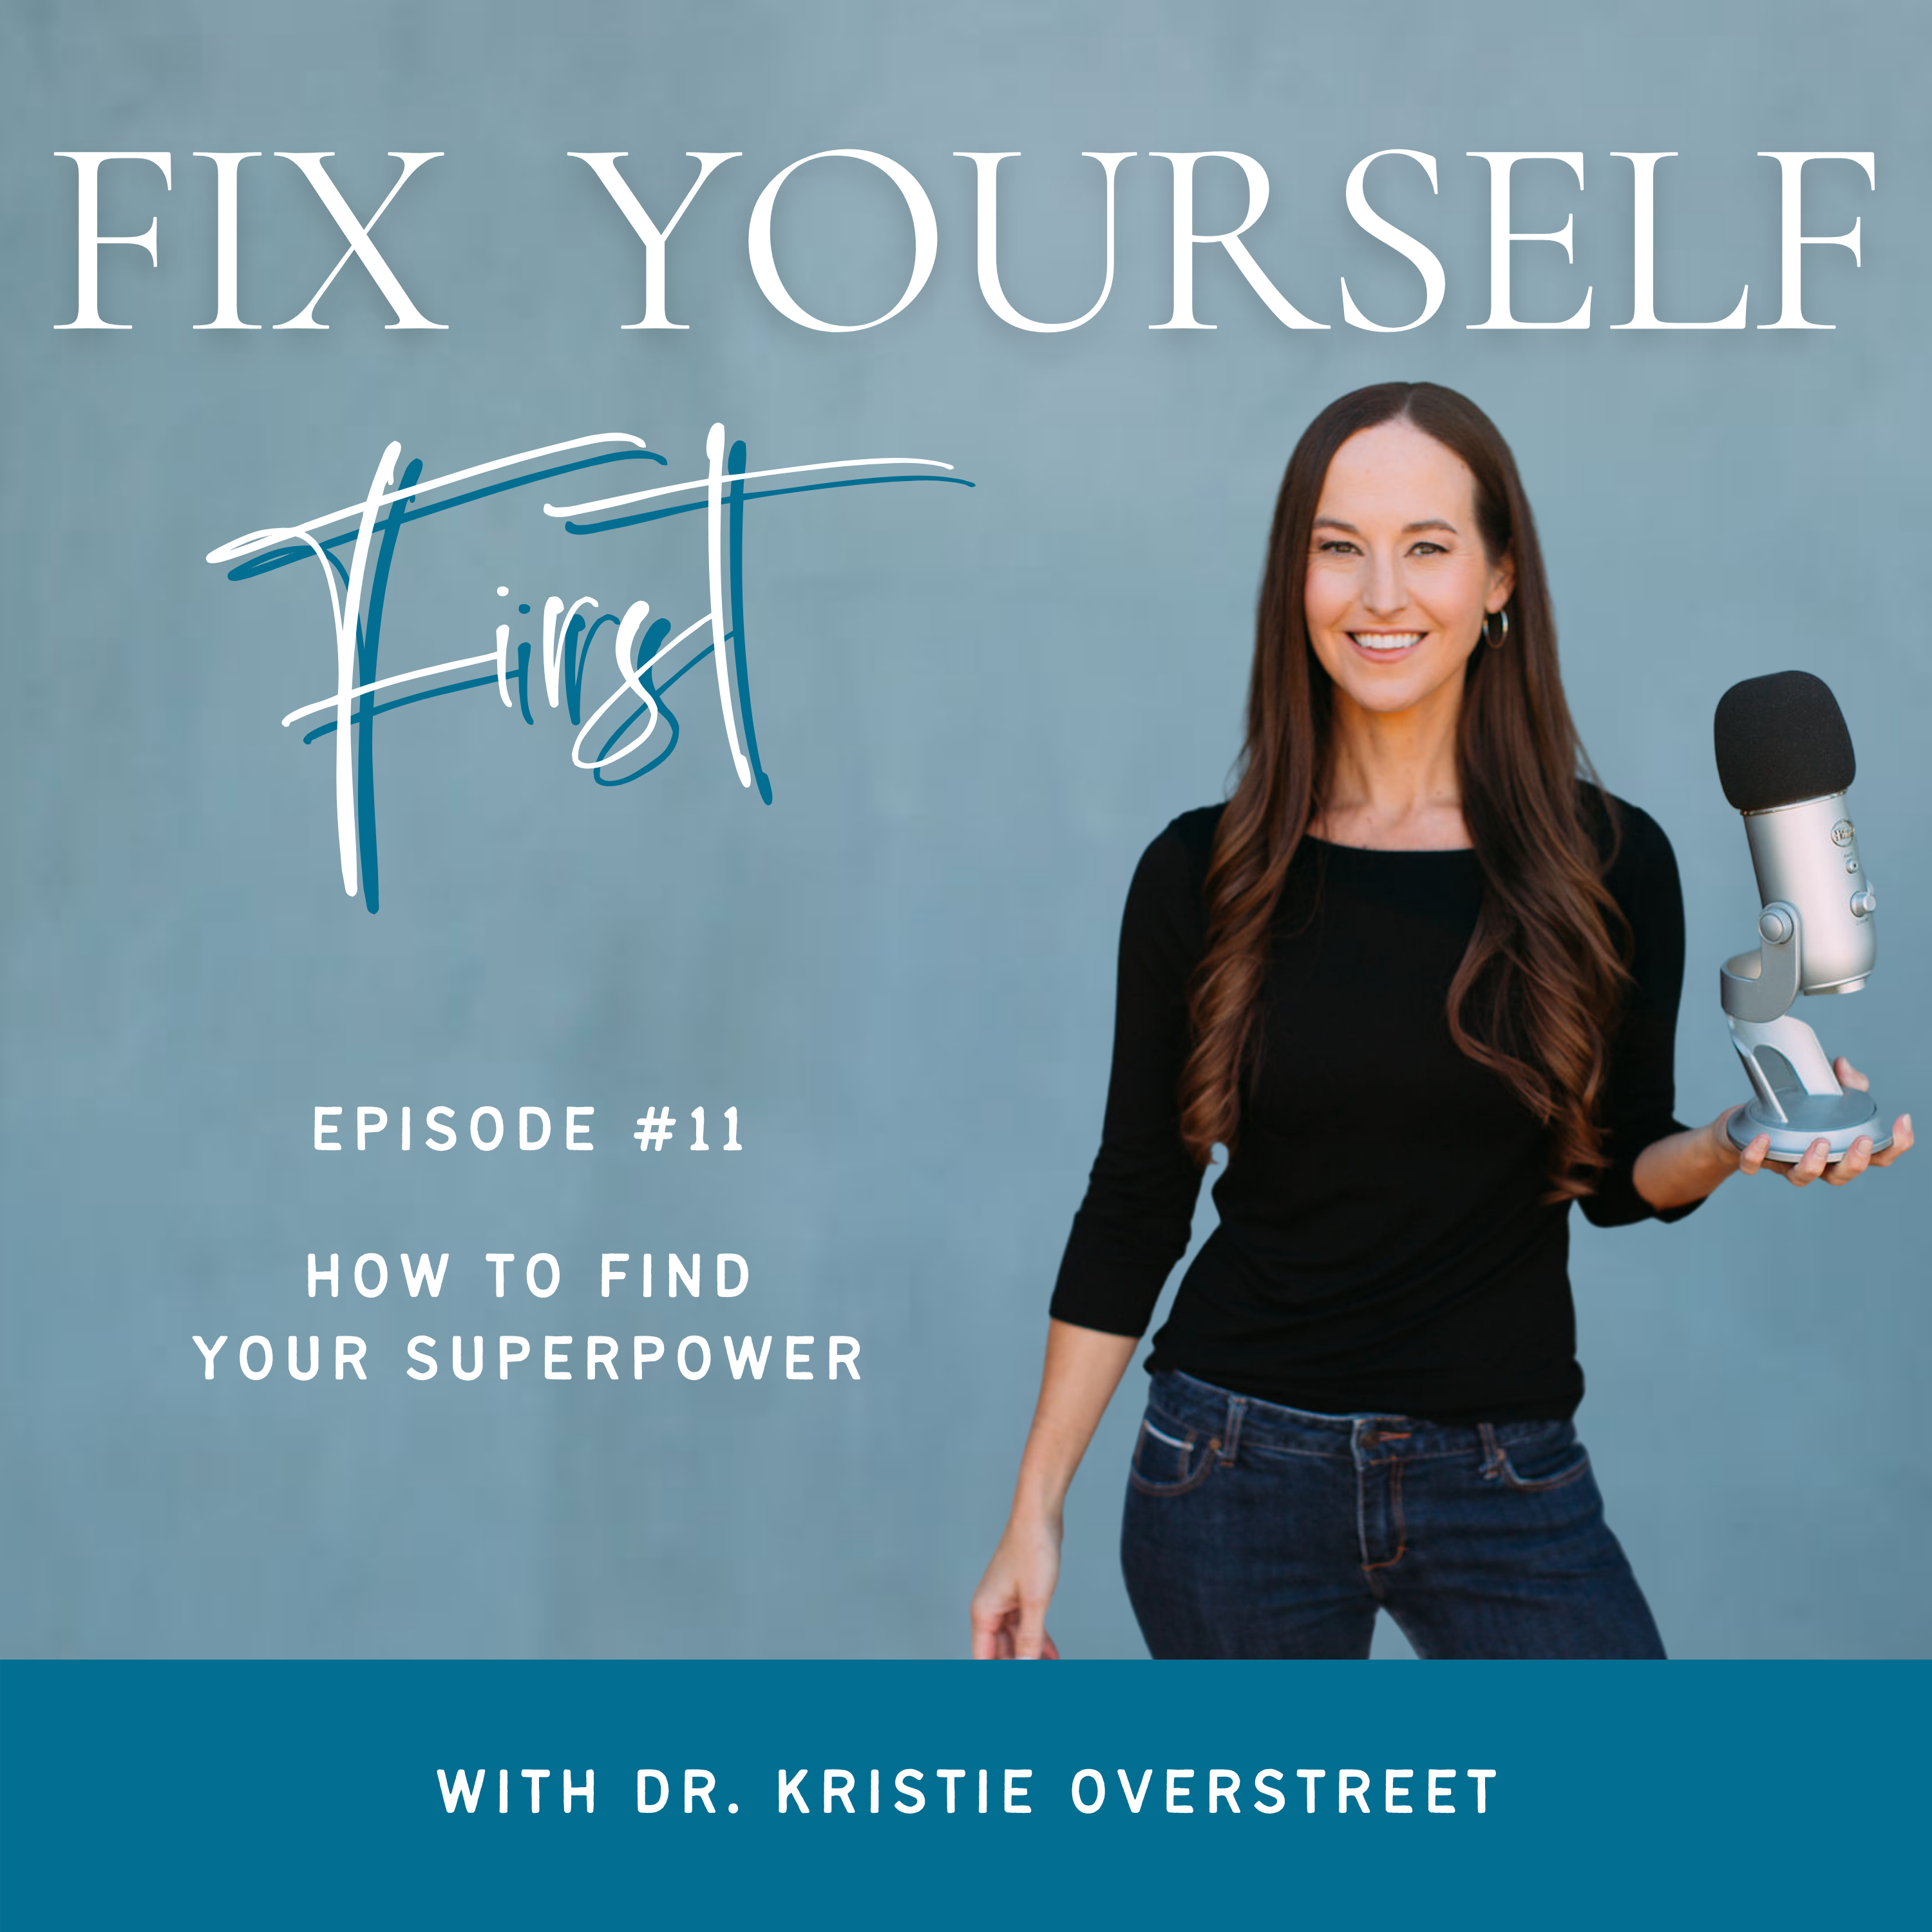 Fix Yourself First - Episode 11